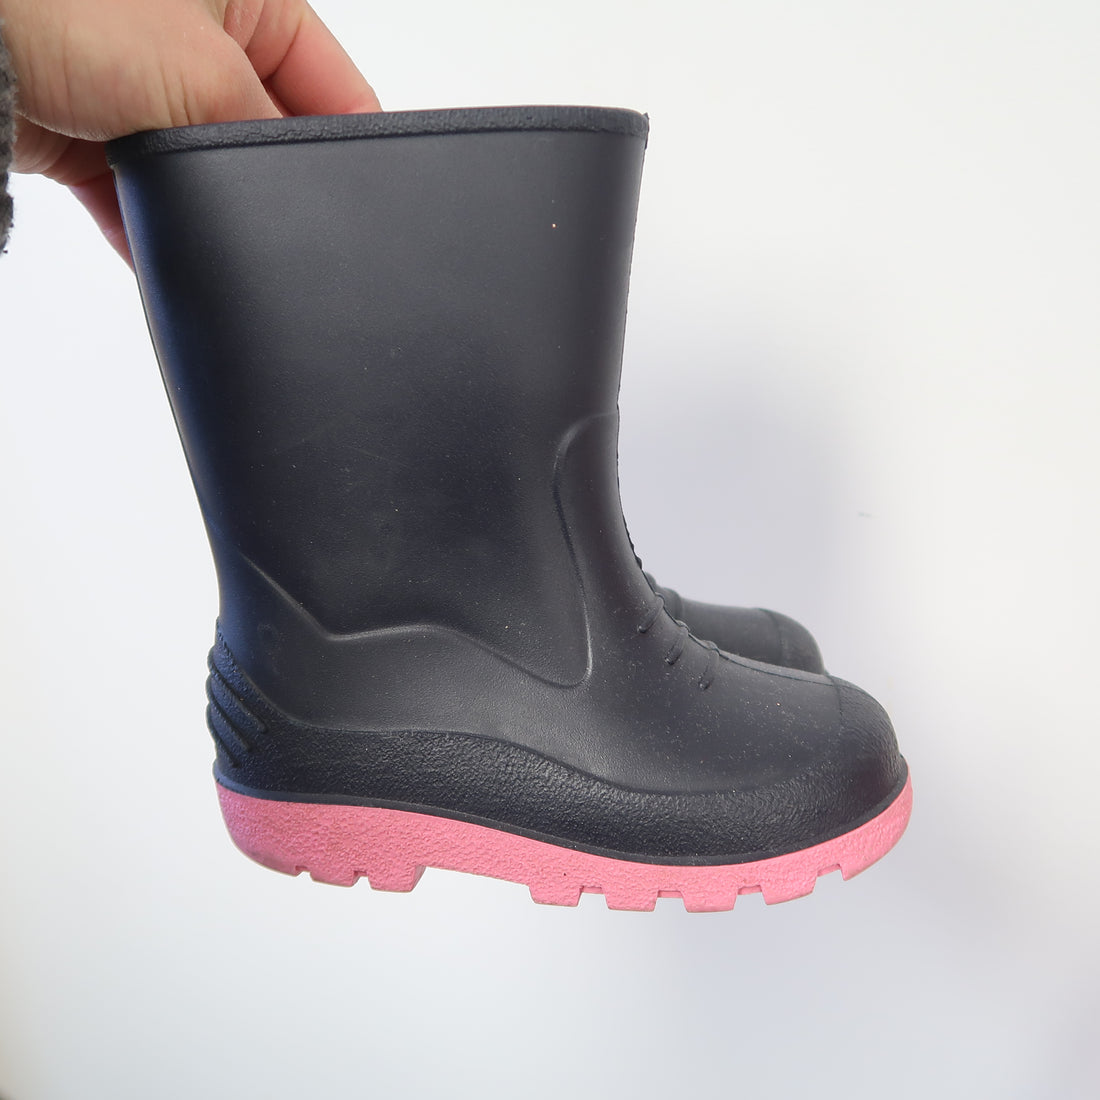 Unknown Brand - Rubber Boots (Shoes - 9)